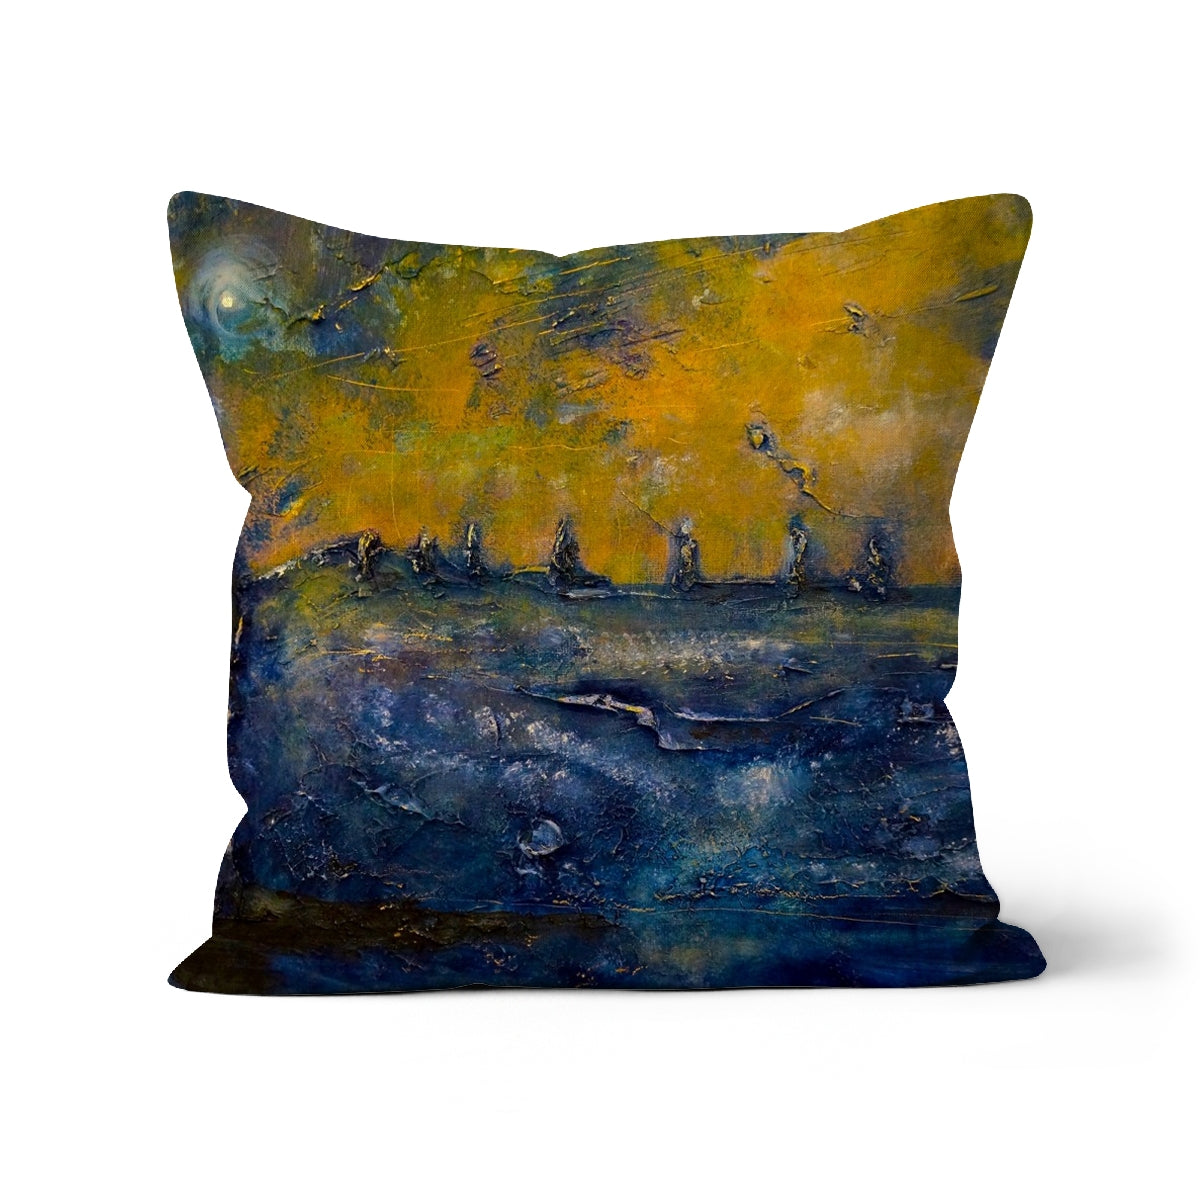 Brodgar Moonlight Orkney Art Gifts Cushion-Cushions-Orkney Art Gallery-Canvas-22"x22"-Paintings, Prints, Homeware, Art Gifts From Scotland By Scottish Artist Kevin Hunter